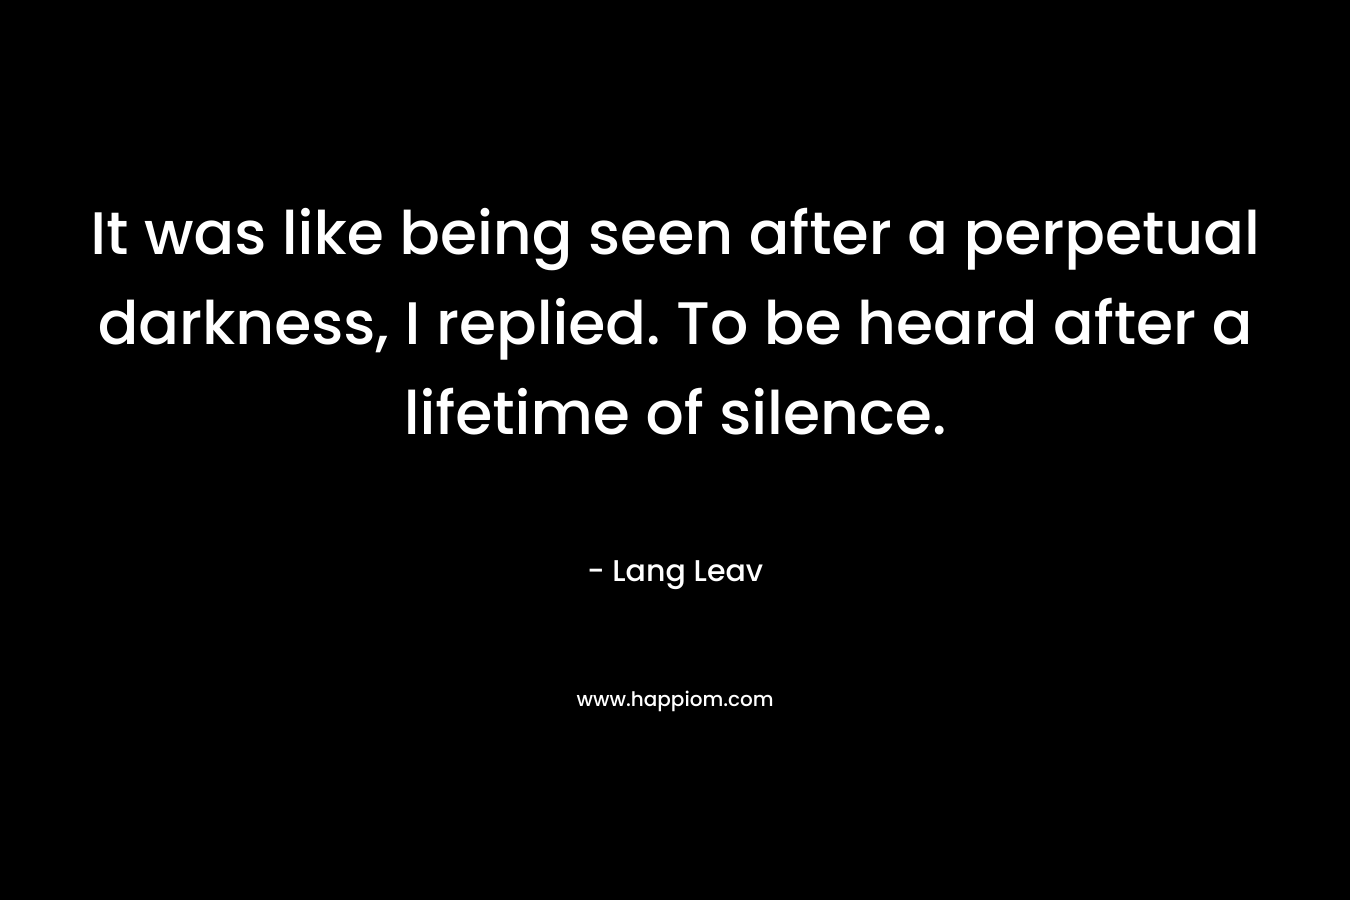 It was like being seen after a perpetual darkness, I replied. To be heard after a lifetime of silence.